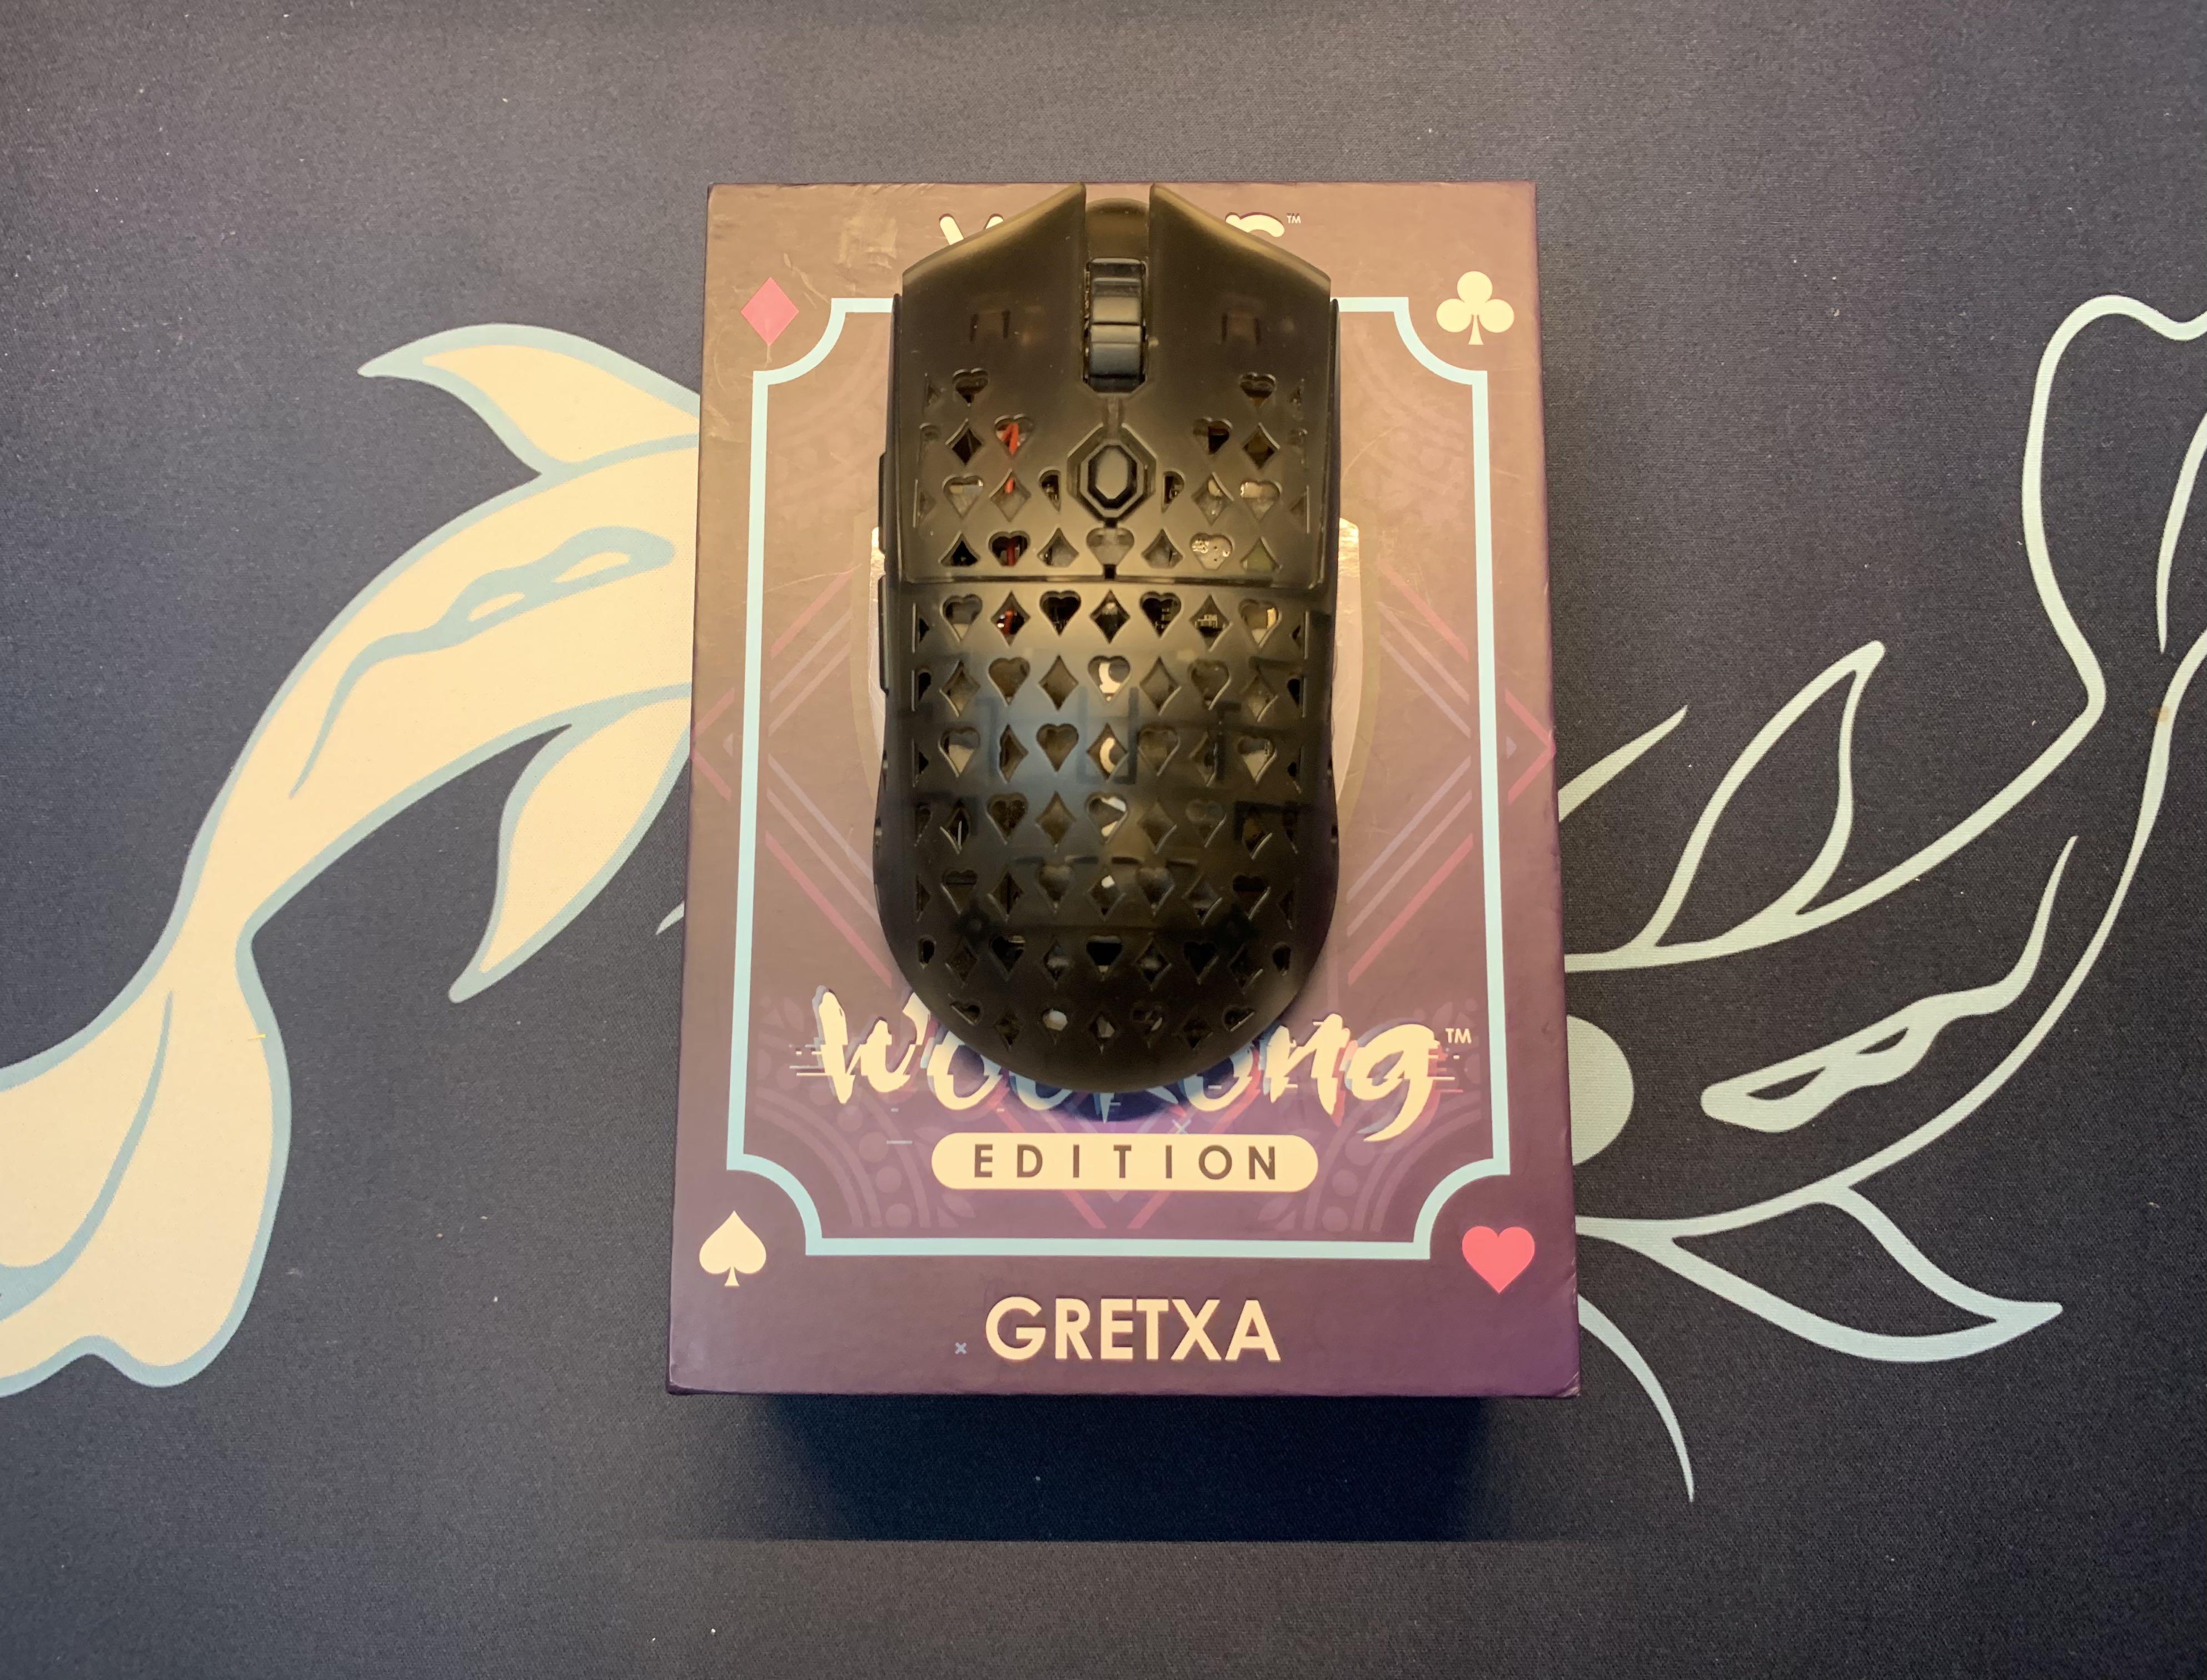 BT.L VANCER GRETXA “WOOKONG EDITION” WIRELESS GAMING MOUSE V2